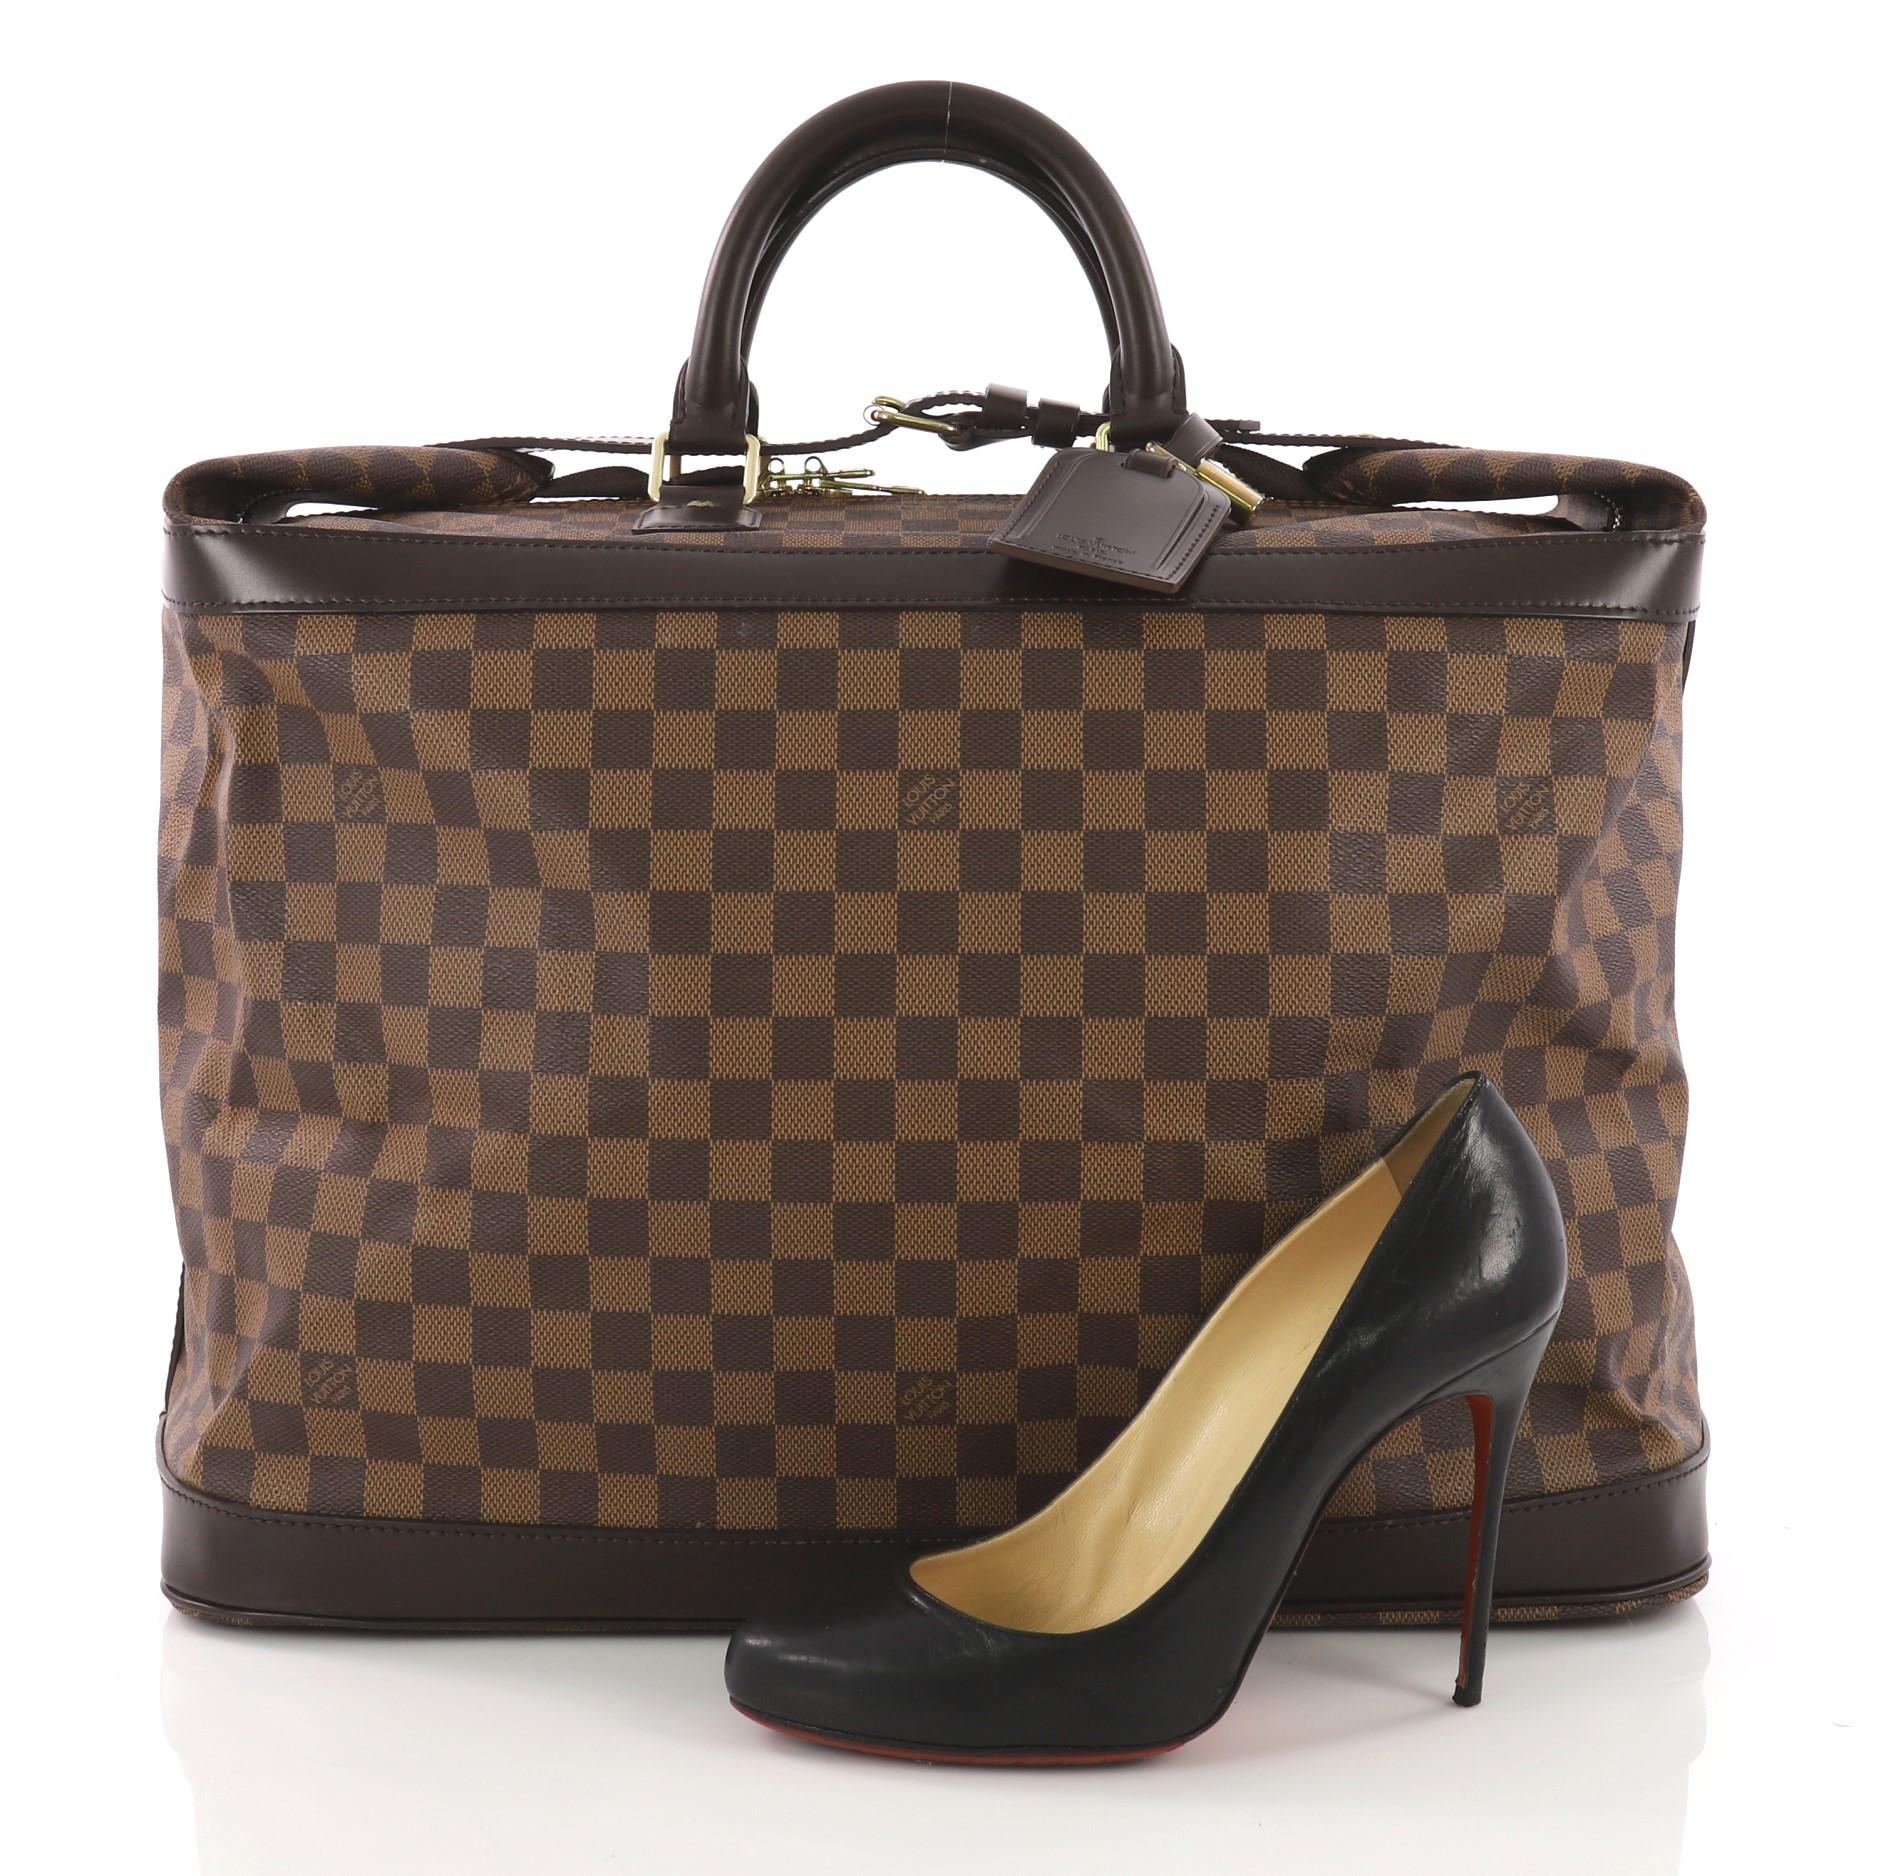 This Louis Vuitton Cruiser Handbag Damier 45, crafted in Louis Vuitton's iconic damier ebene coated canvas, features dual rolled handles, dark brown leather trims, and gold-tone hardware. Its top buckle belt strap and zip closure holds the folded